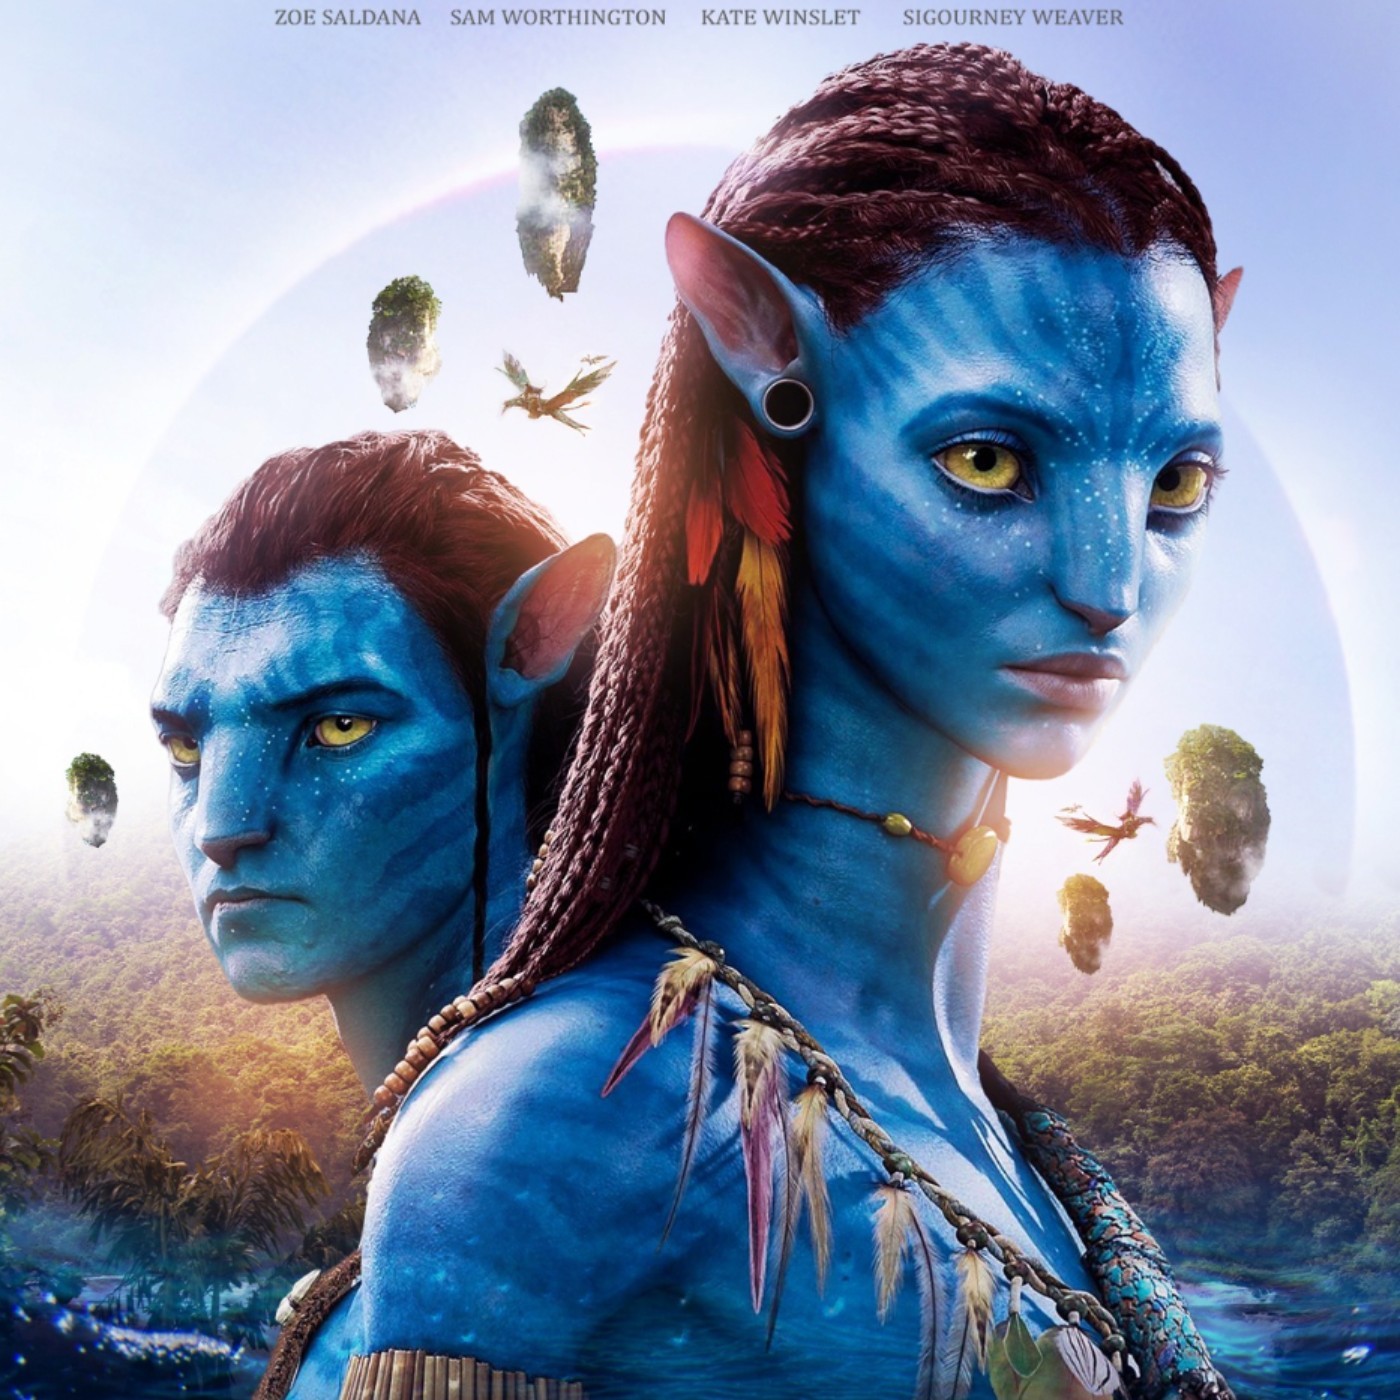 Avatar 2 The Way of Water Full Movie Download For Free At Home - !Avatar 2  The Way of Water Full Movie Download For Free At Home | SoundOn